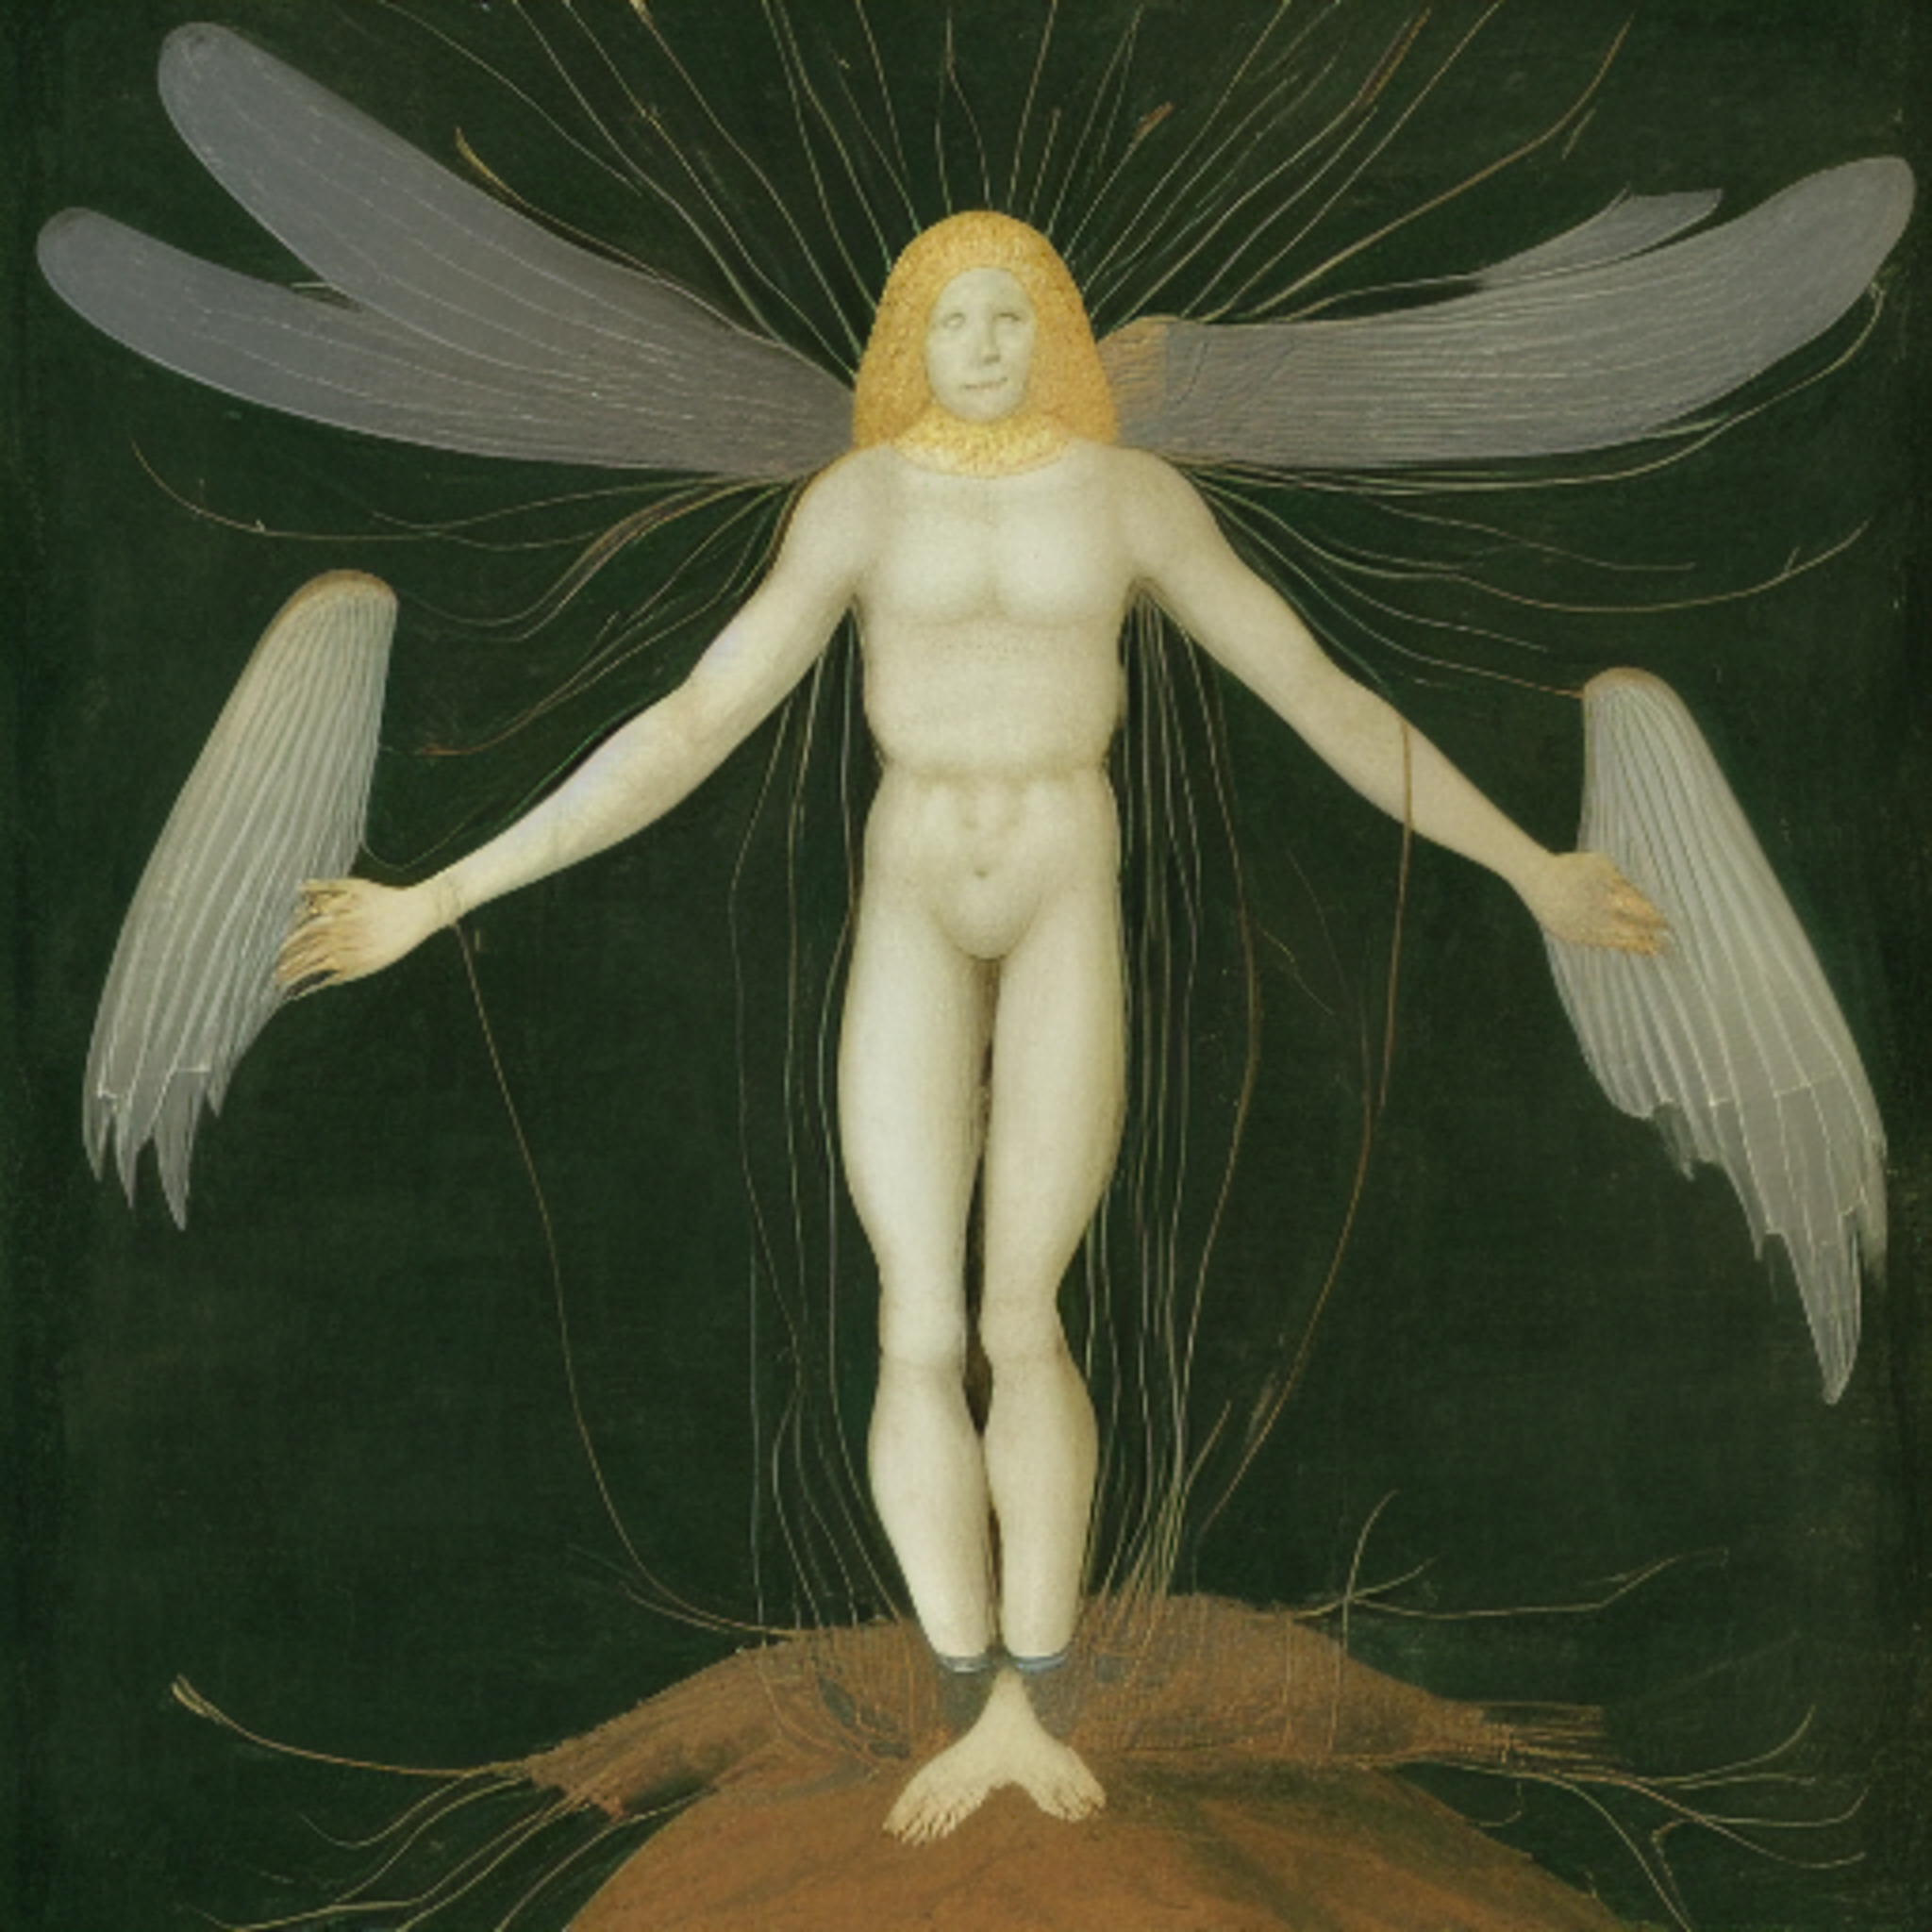 A square image with a dark green background and a warped Christ-like figure with wings sprouting from their hands and neck